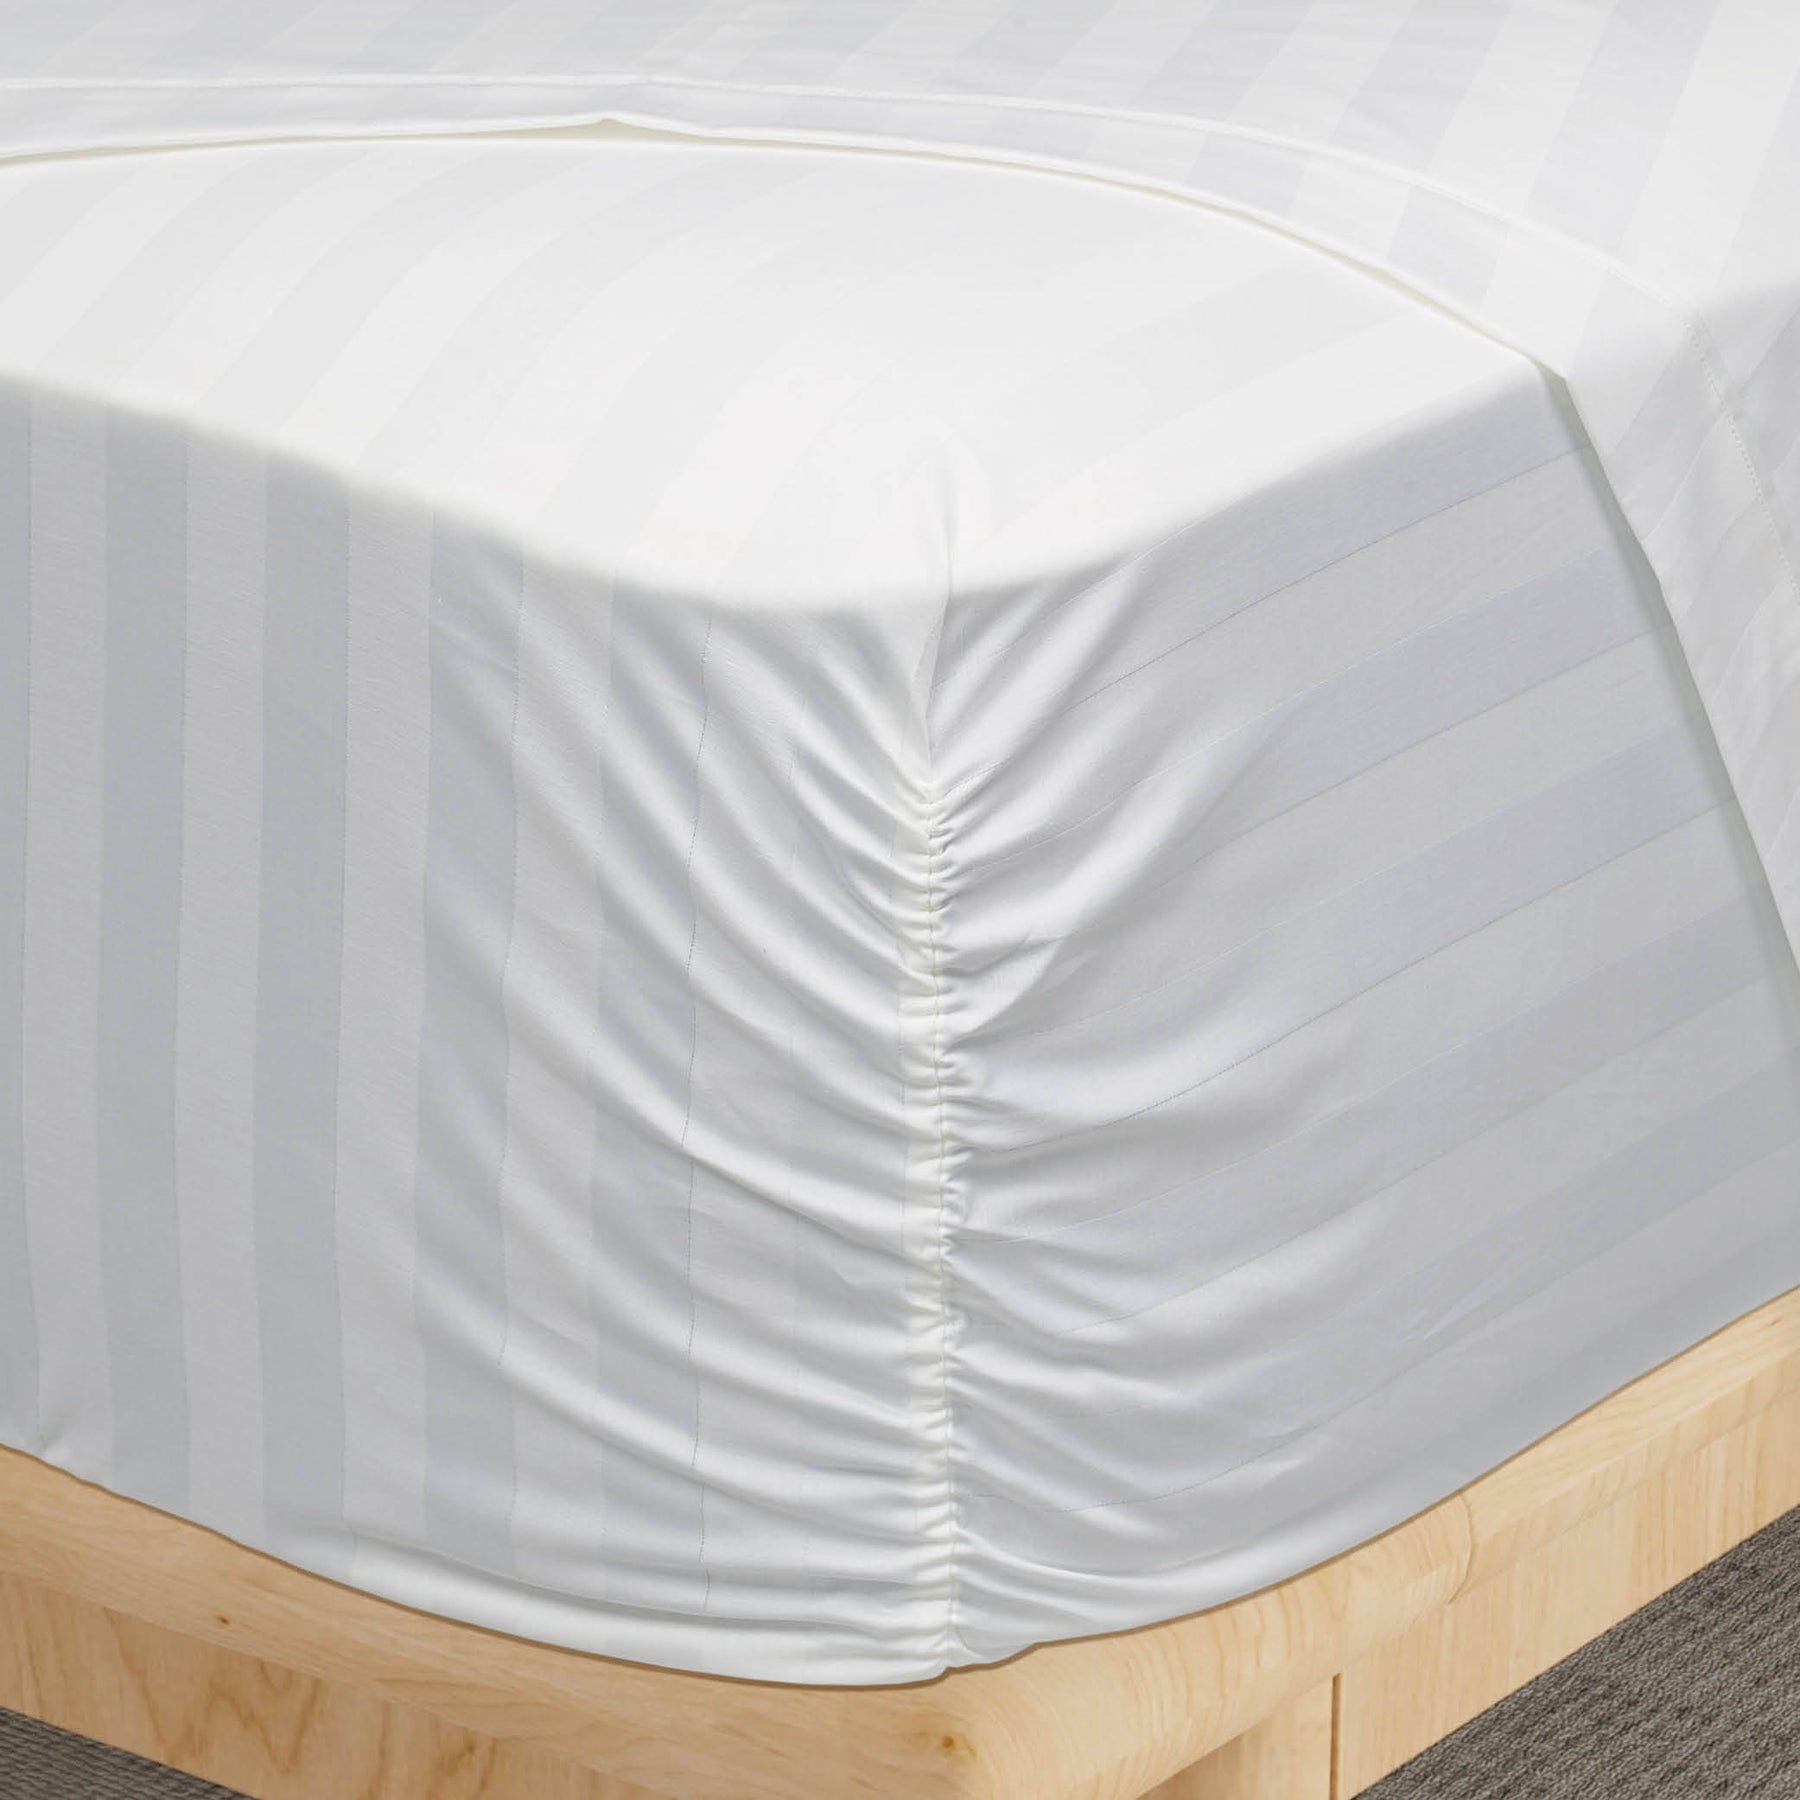 Image of the Luxury Resort Hotel Collection Classic Cotton Sheet Set on a mattress showcasing the Precision-Fit® Corner on the mattress